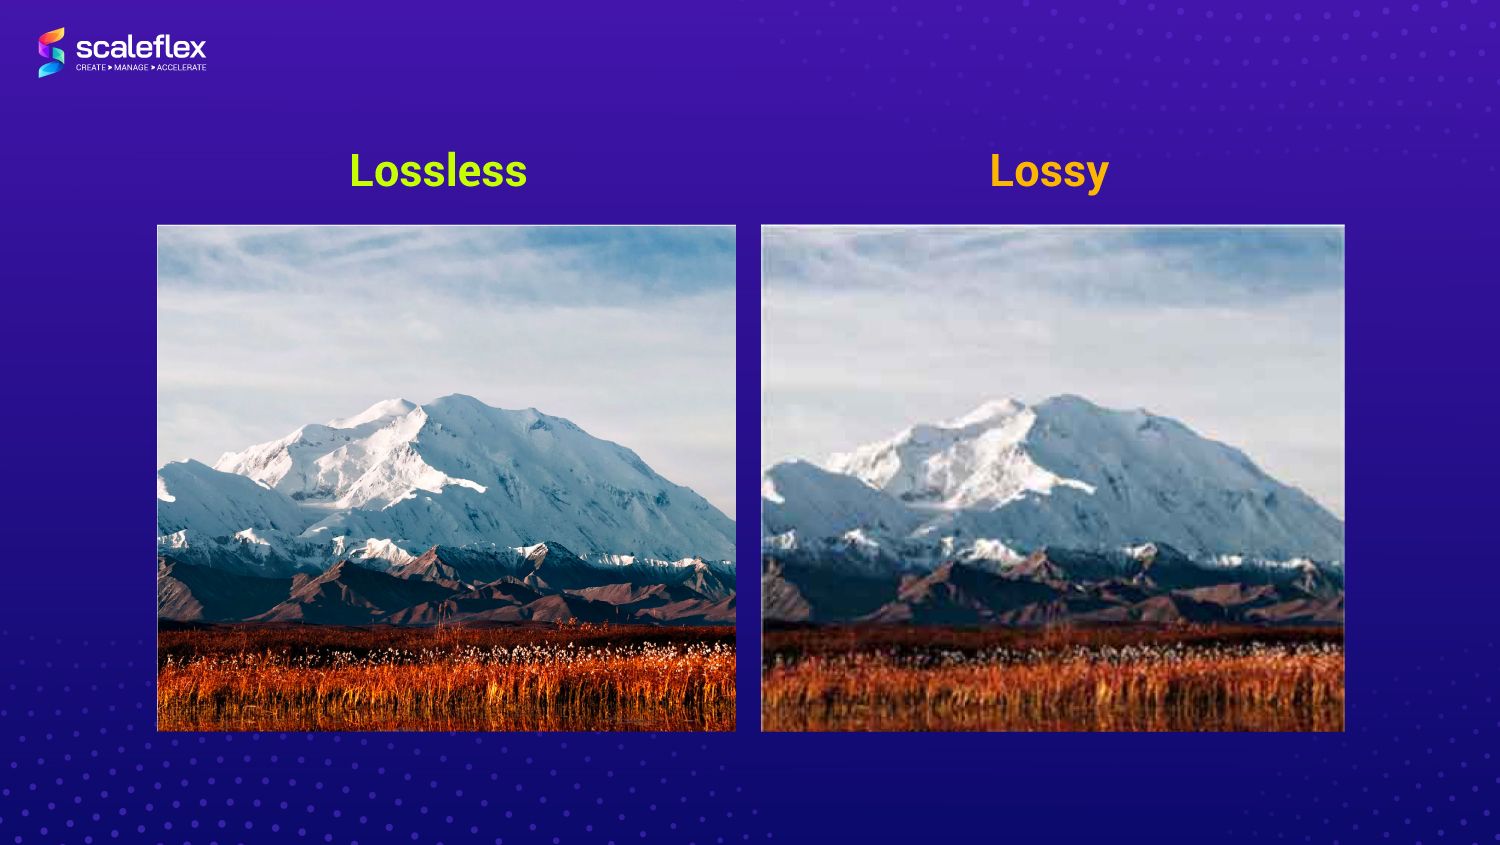 The side-by-side comparison between lossless and lossy compression.